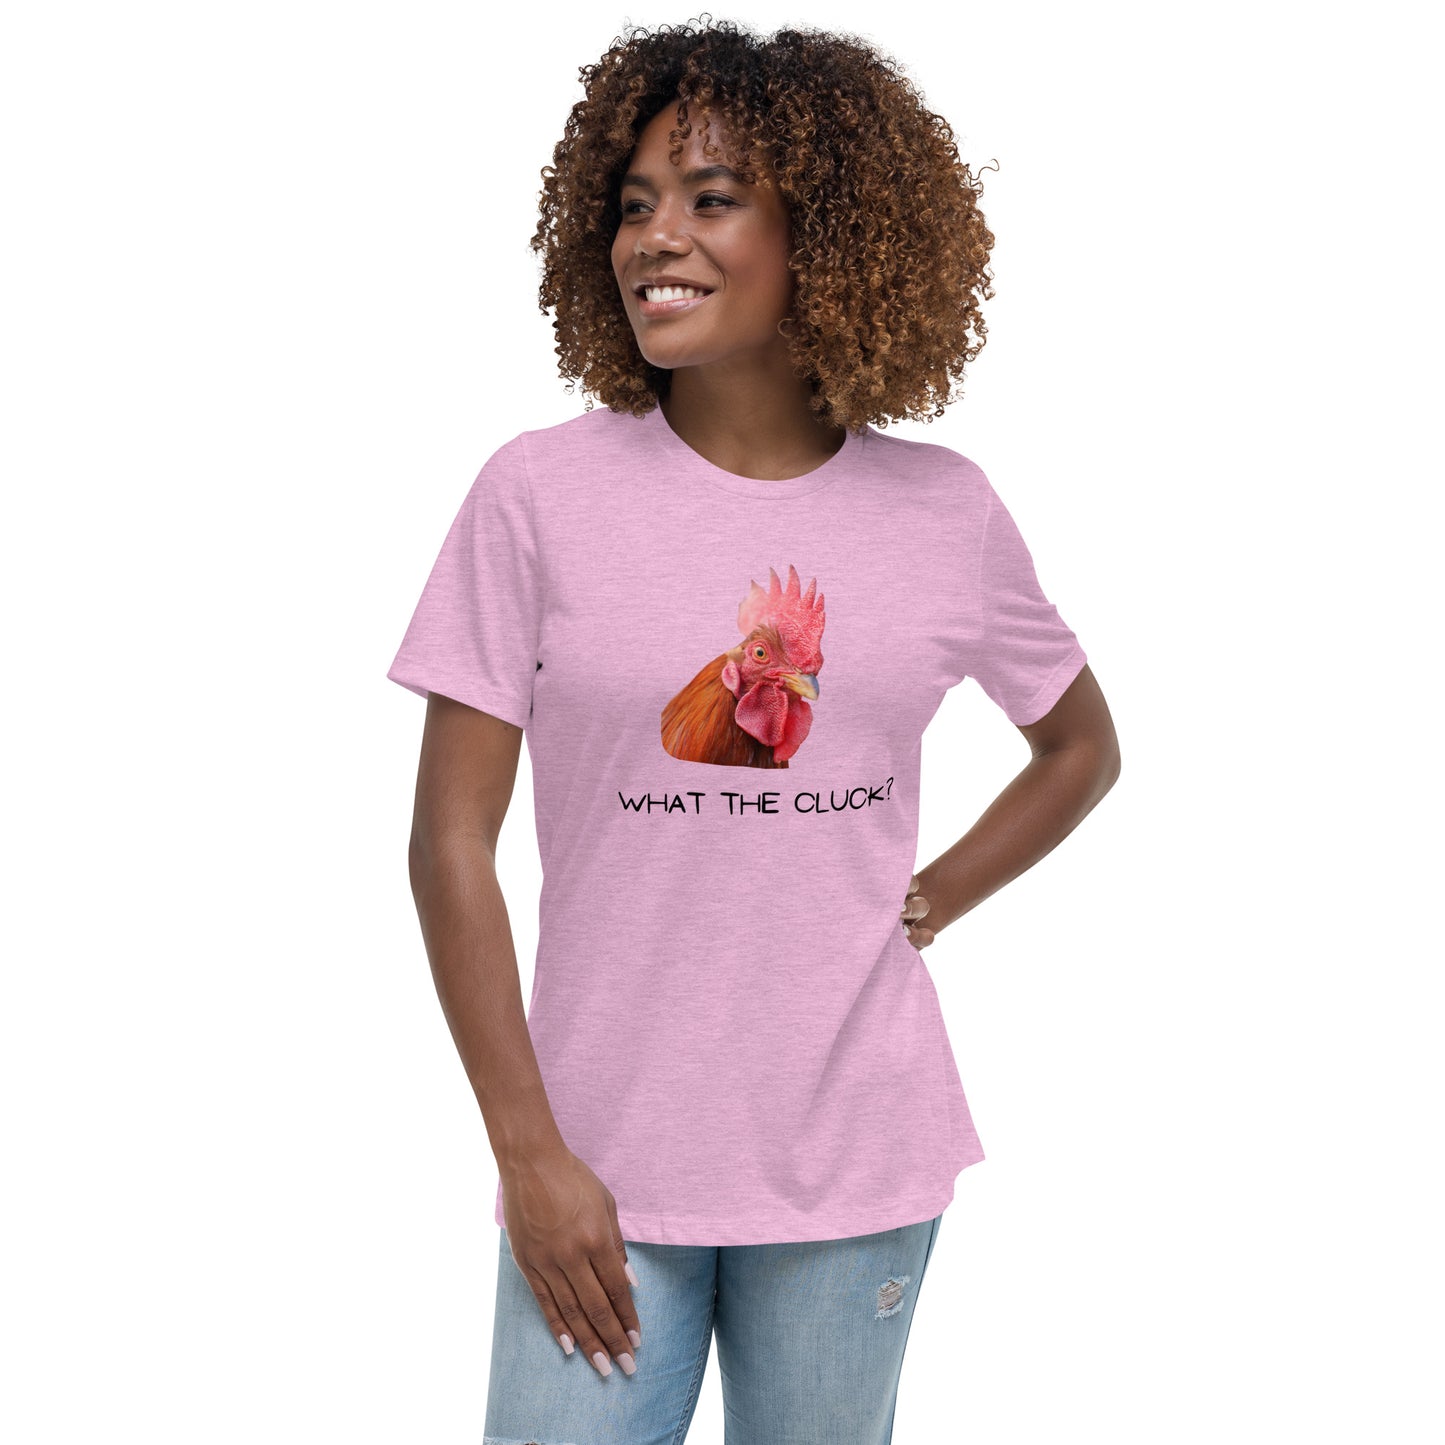 What the Cluck - Woman's T-Shirt